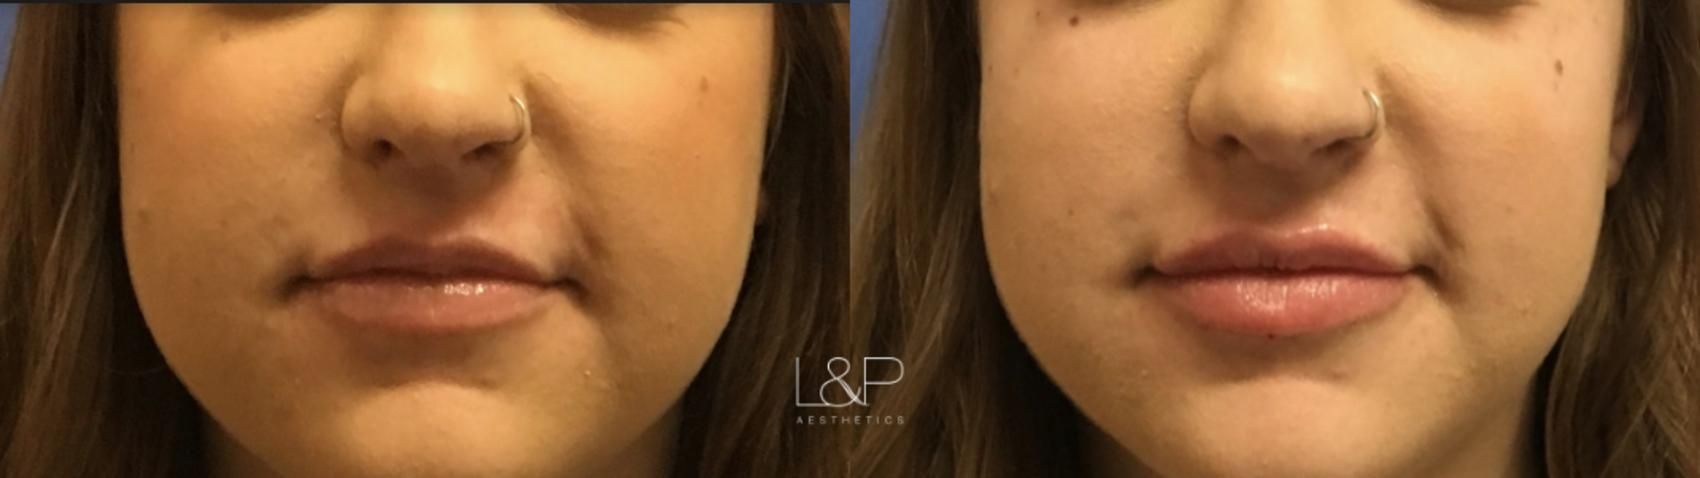 Lip Augmentation before and after treatment